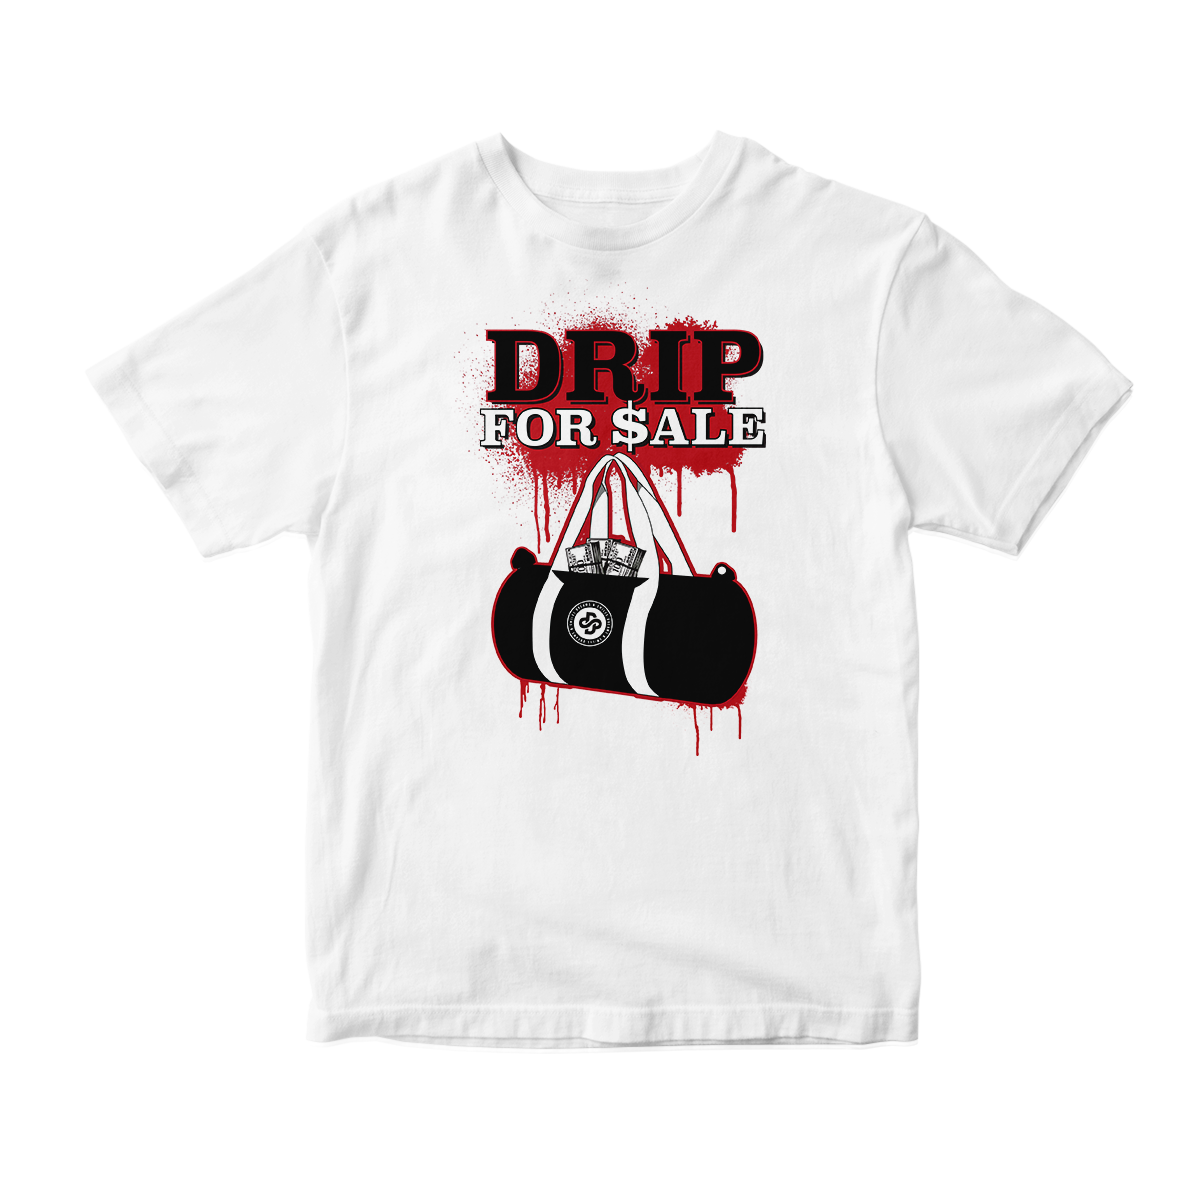 'Drip For Sale' in Bred 11 CW Short Sleeve Tee